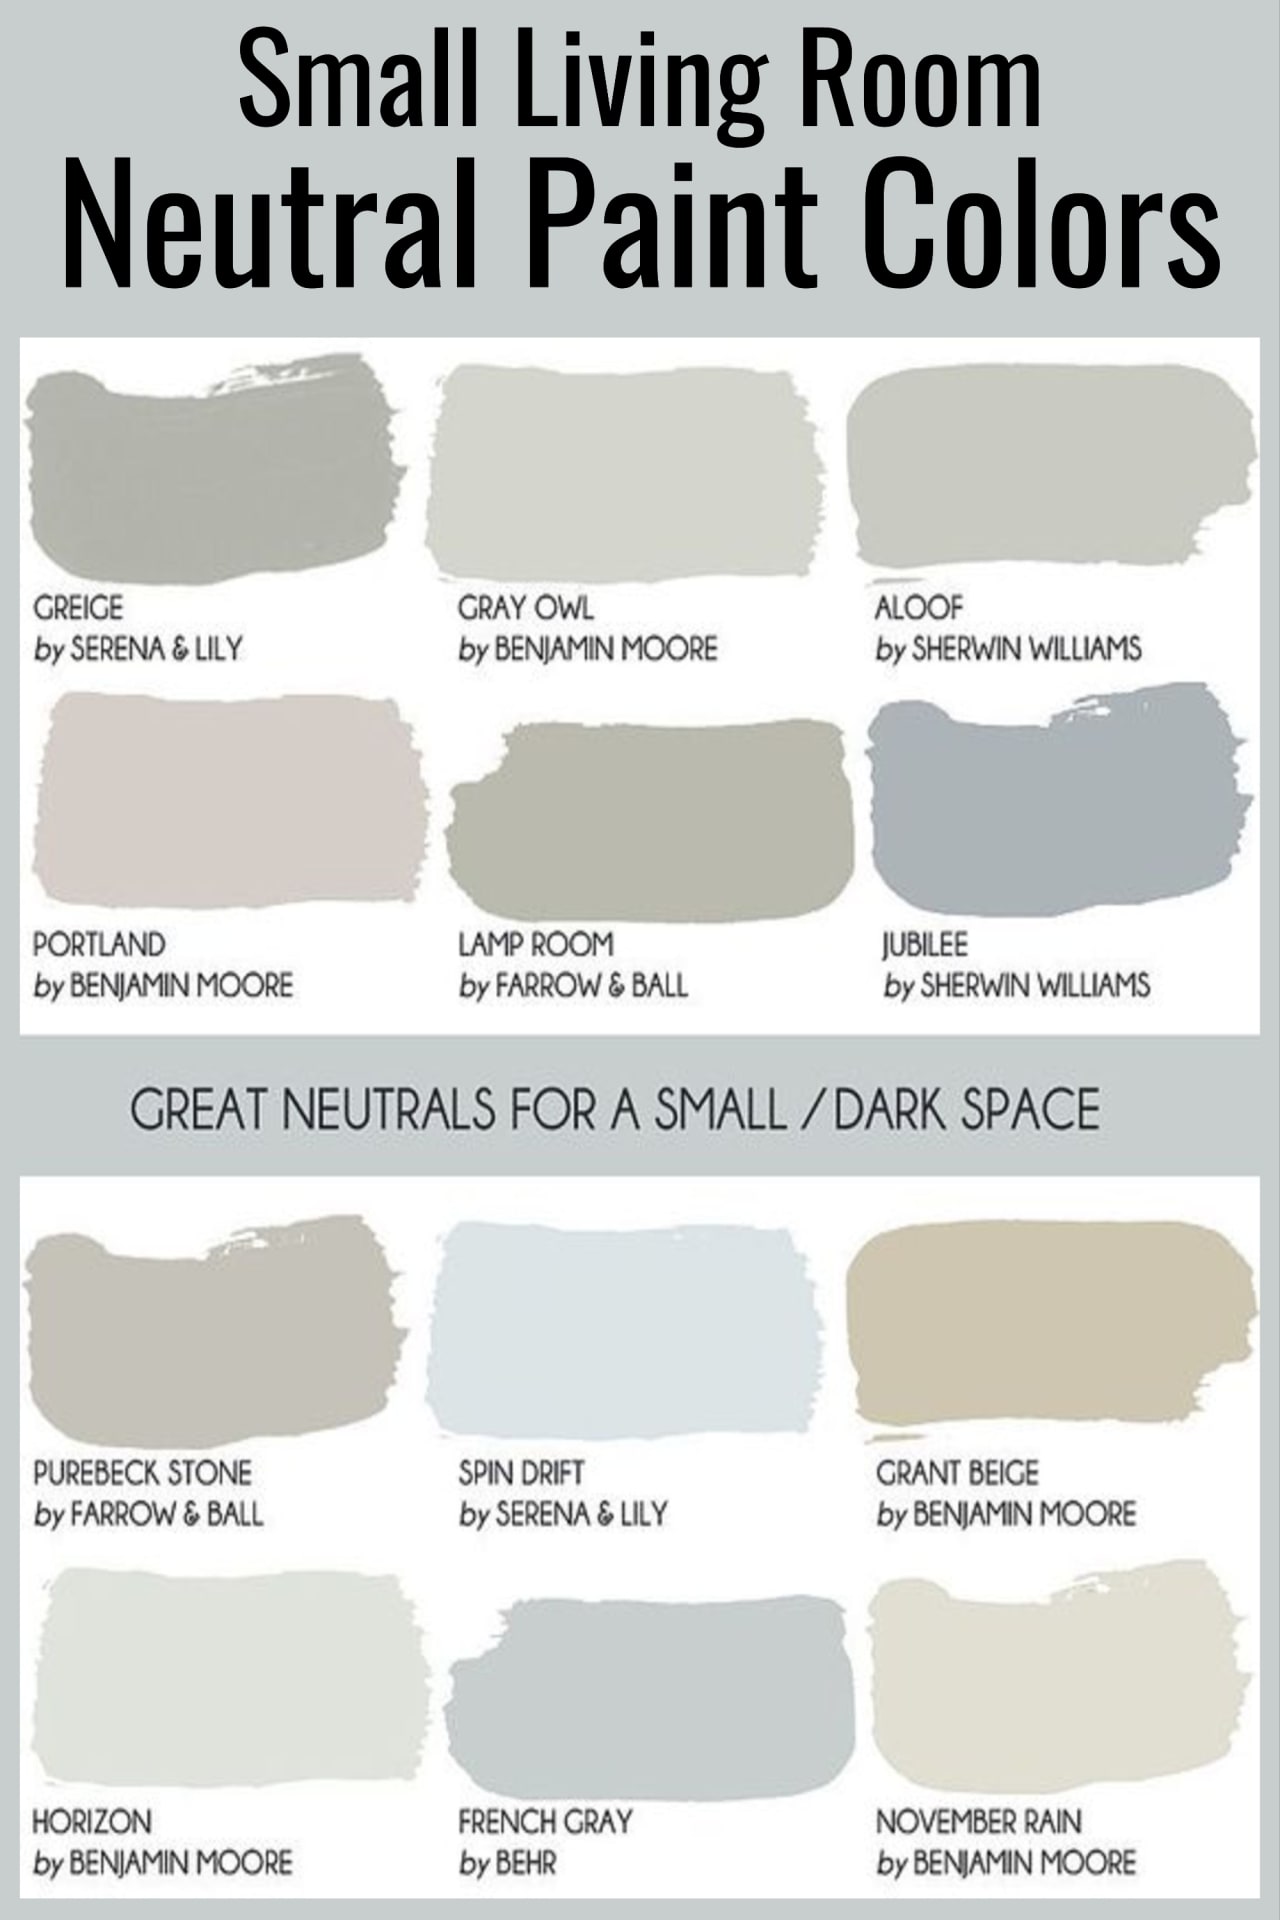 Small living room paint color ideas - neutral living room paint color ideas for your walls to make your tiny living room, family room or den feel warm and cozy